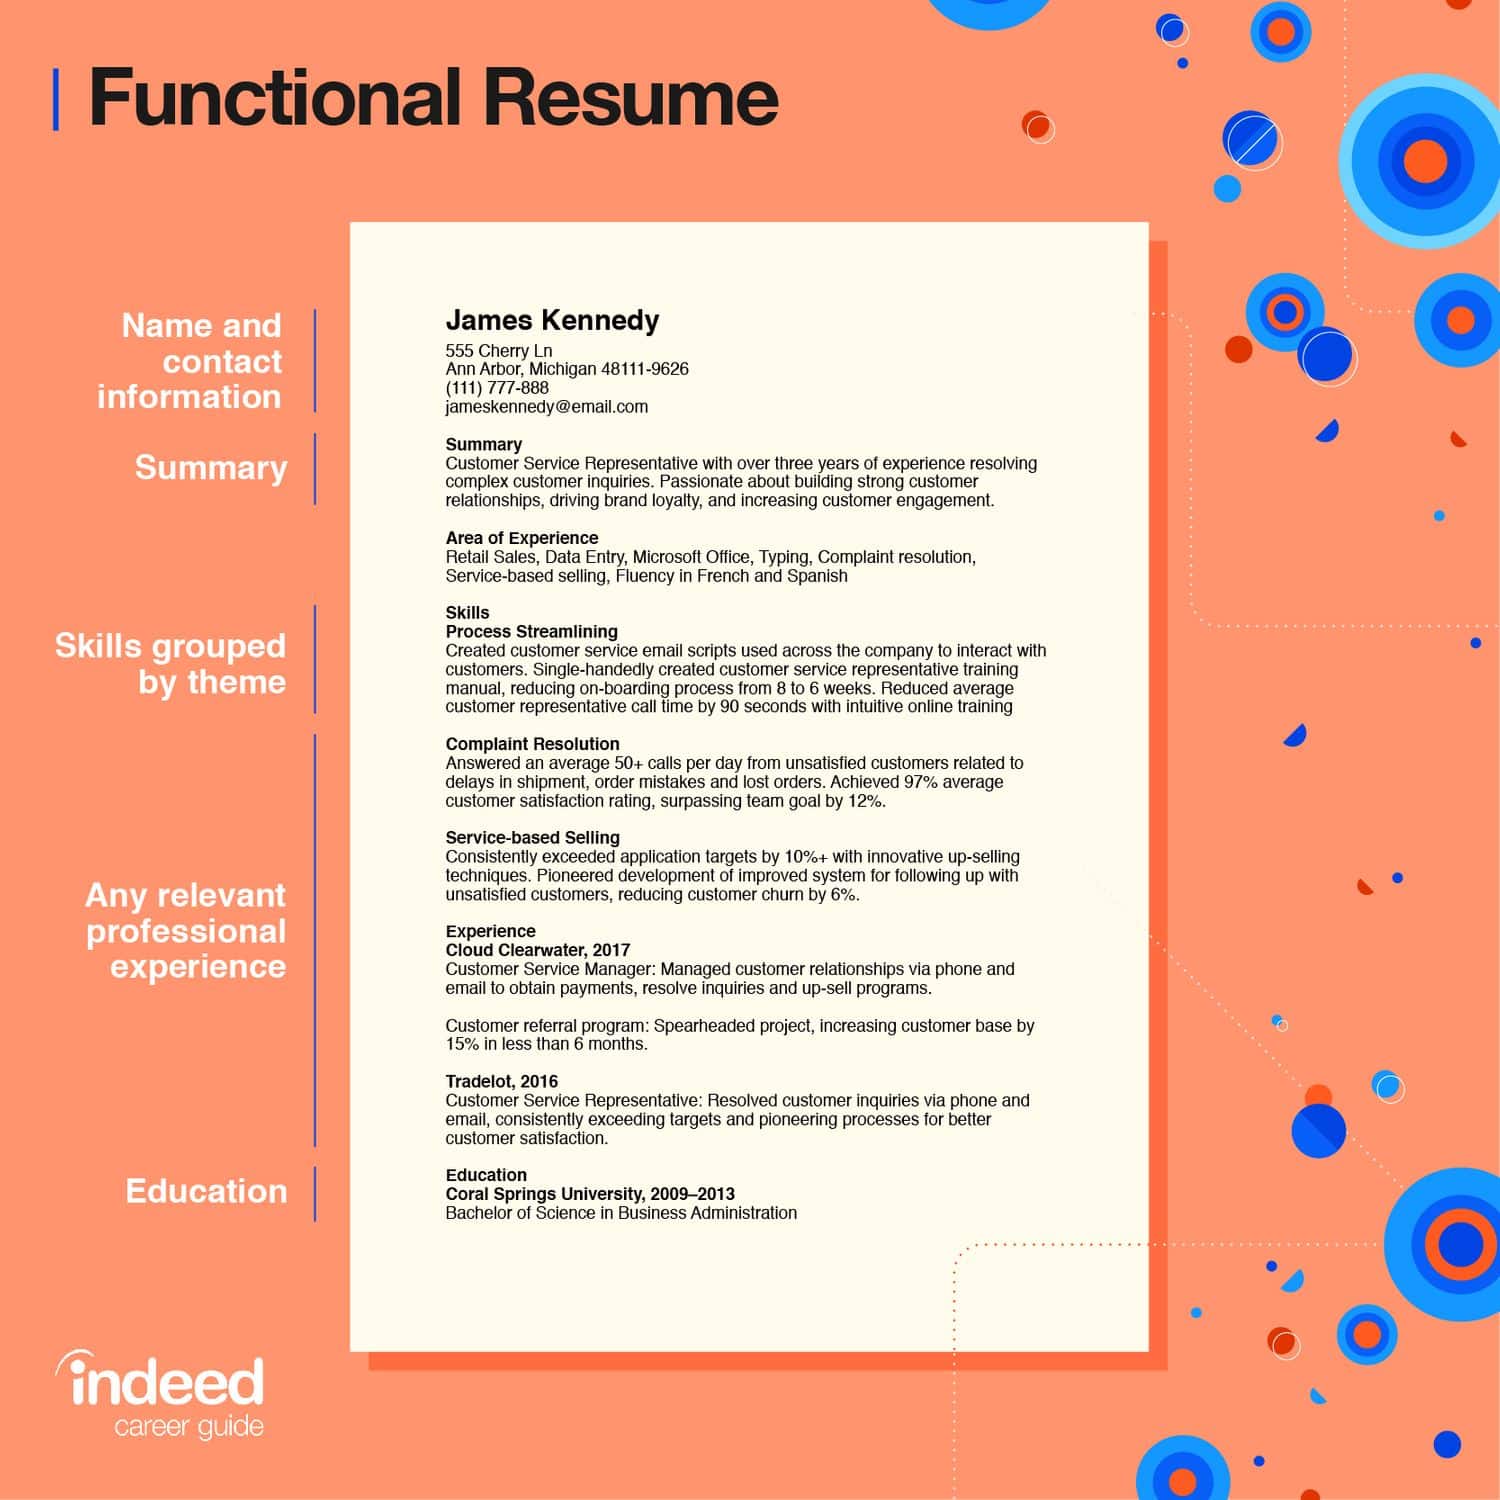 How to Make a Resume for Your First Job